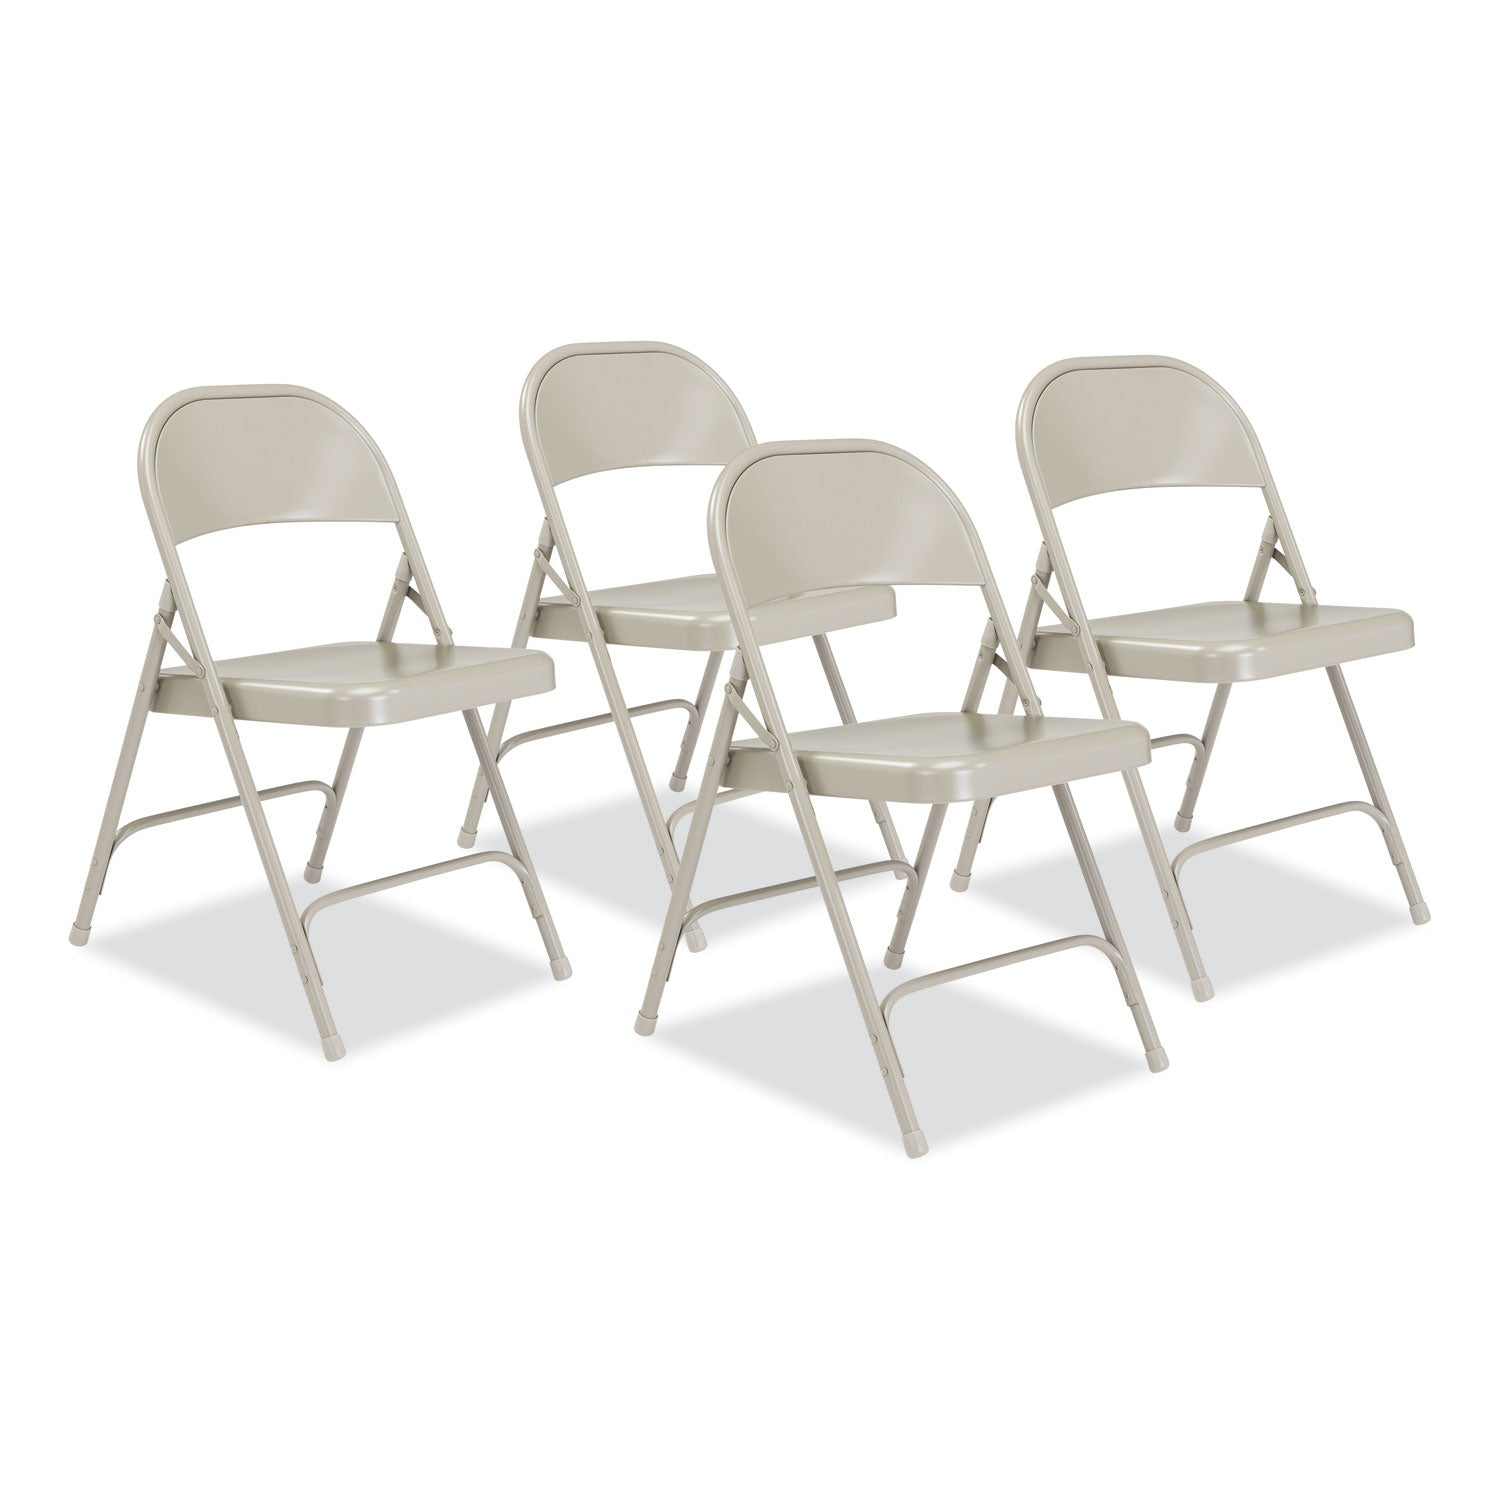 50-series-all-steel-folding-chair-supports-500-lb-1675-seat-height-gray-seat-back-base-4-carton-ships-in-1-3-bus-days_nps52 - 1